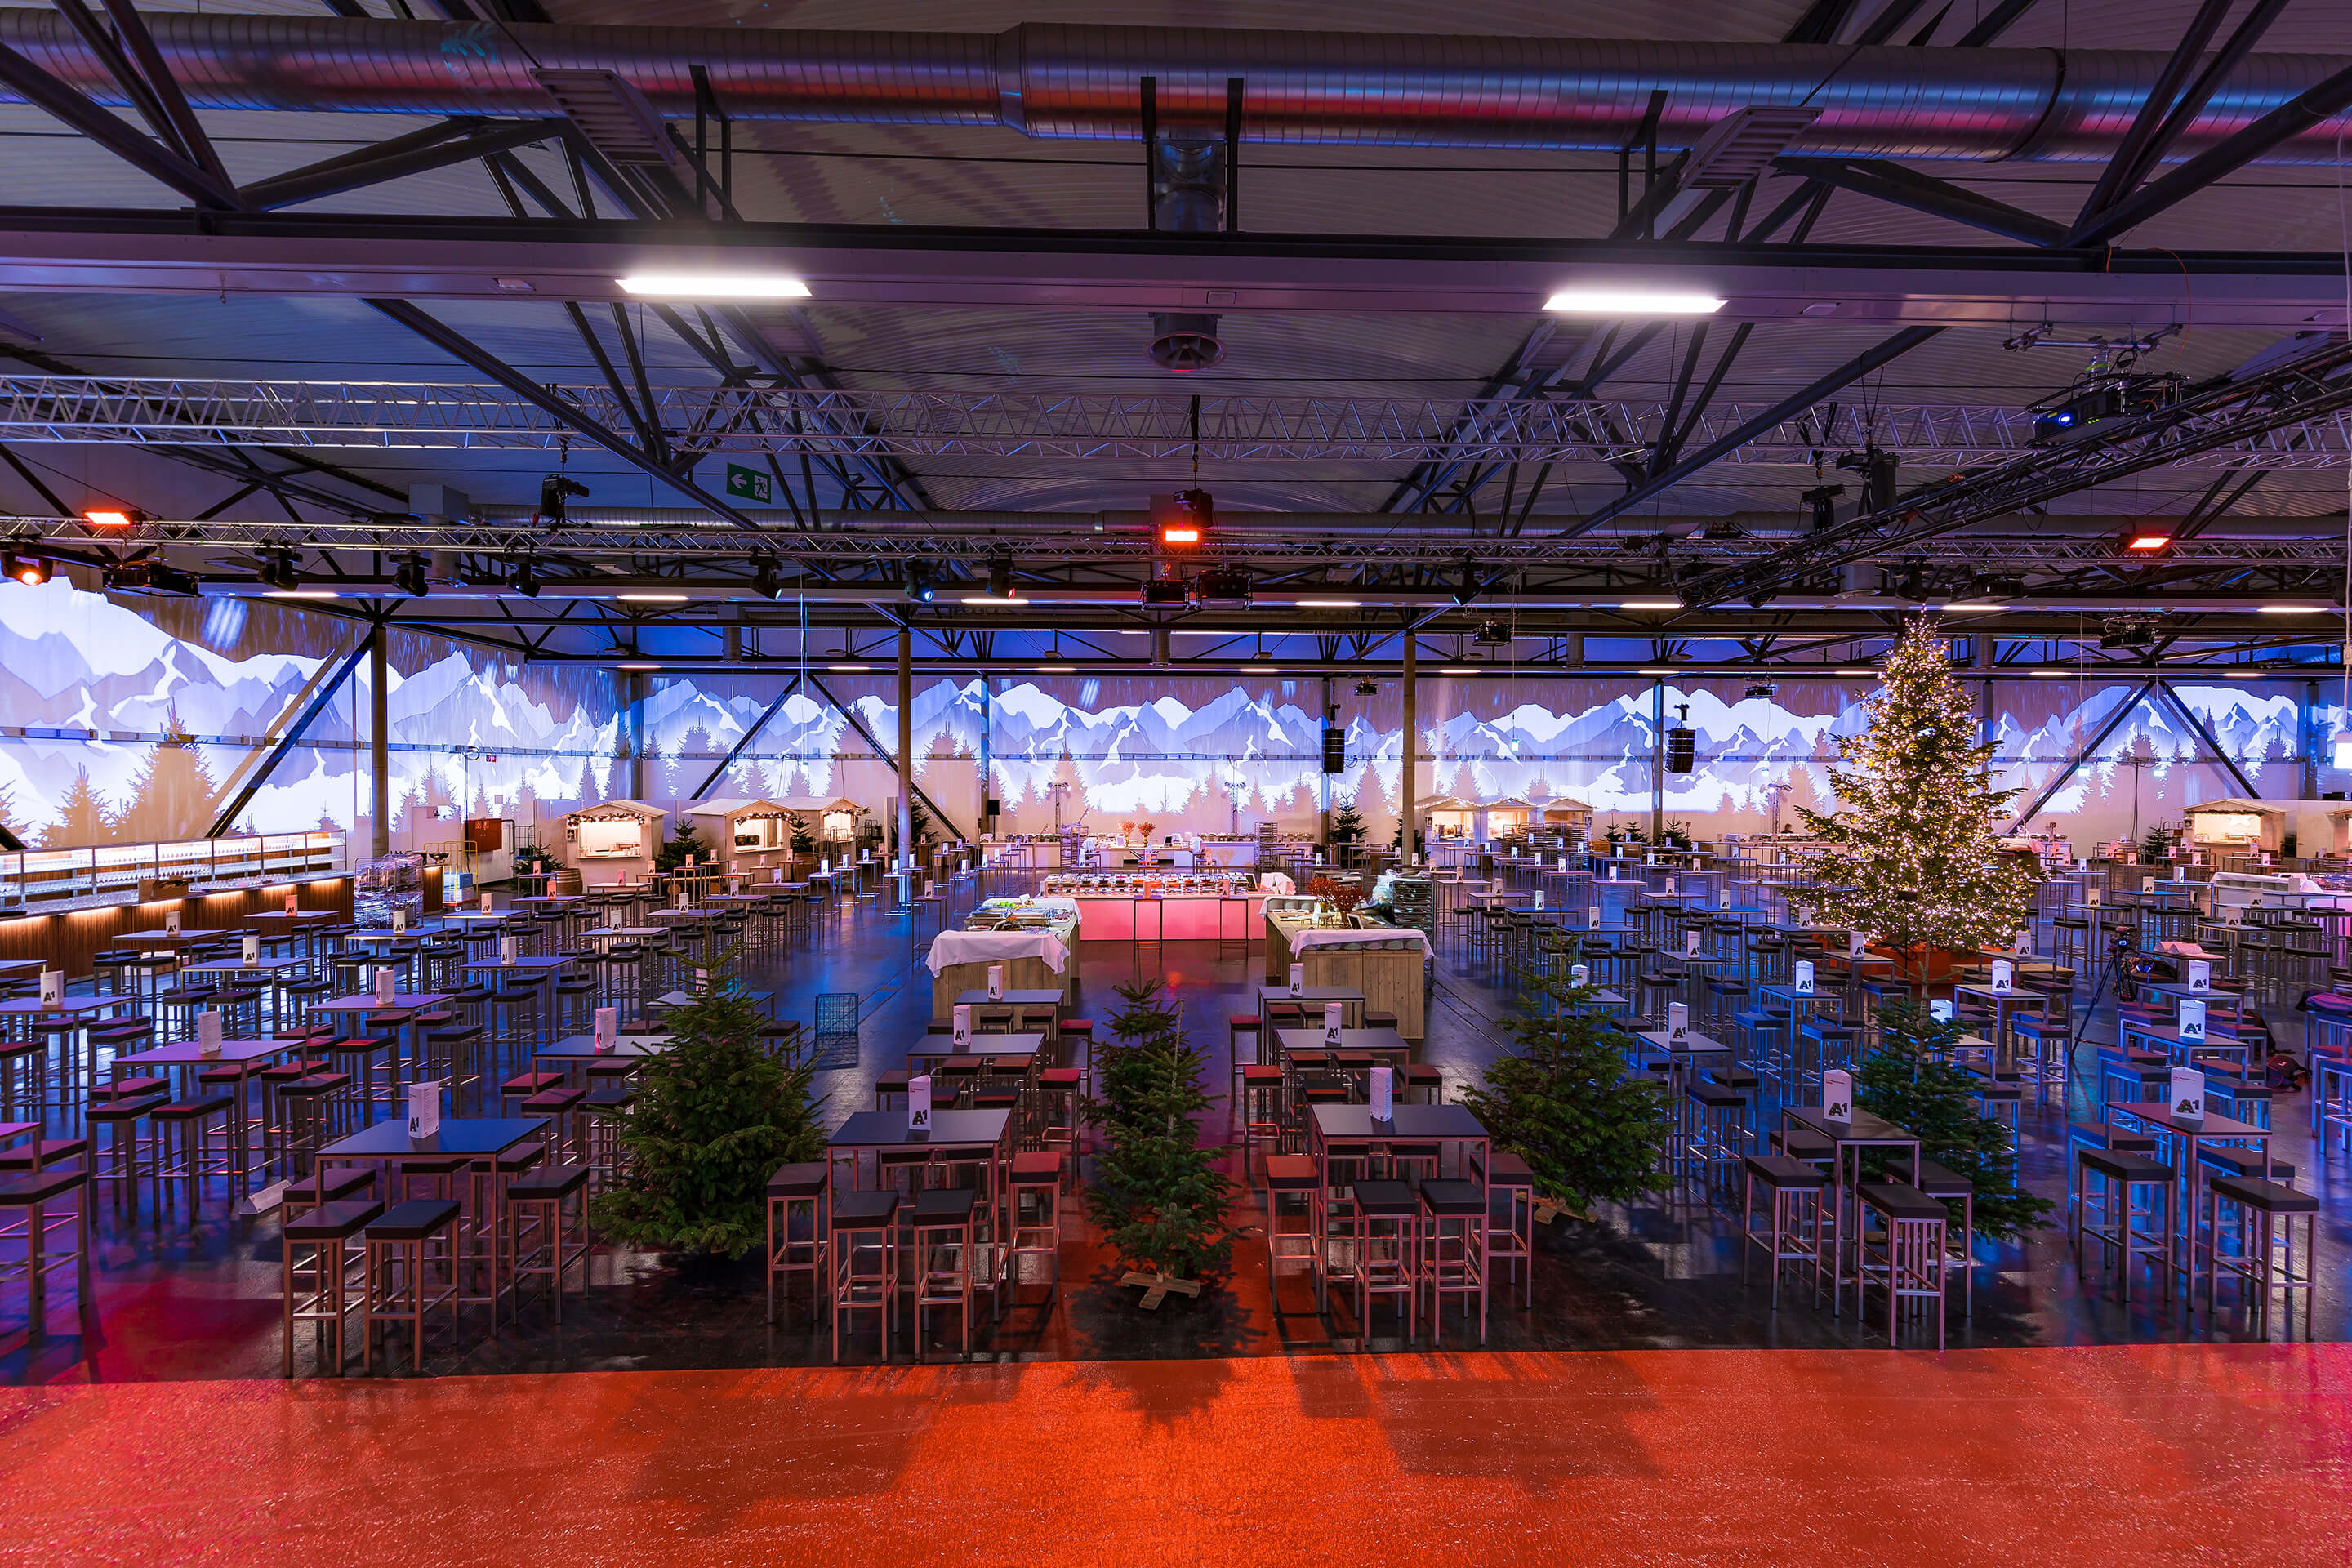 Photo: Event concepts Christmas party setting